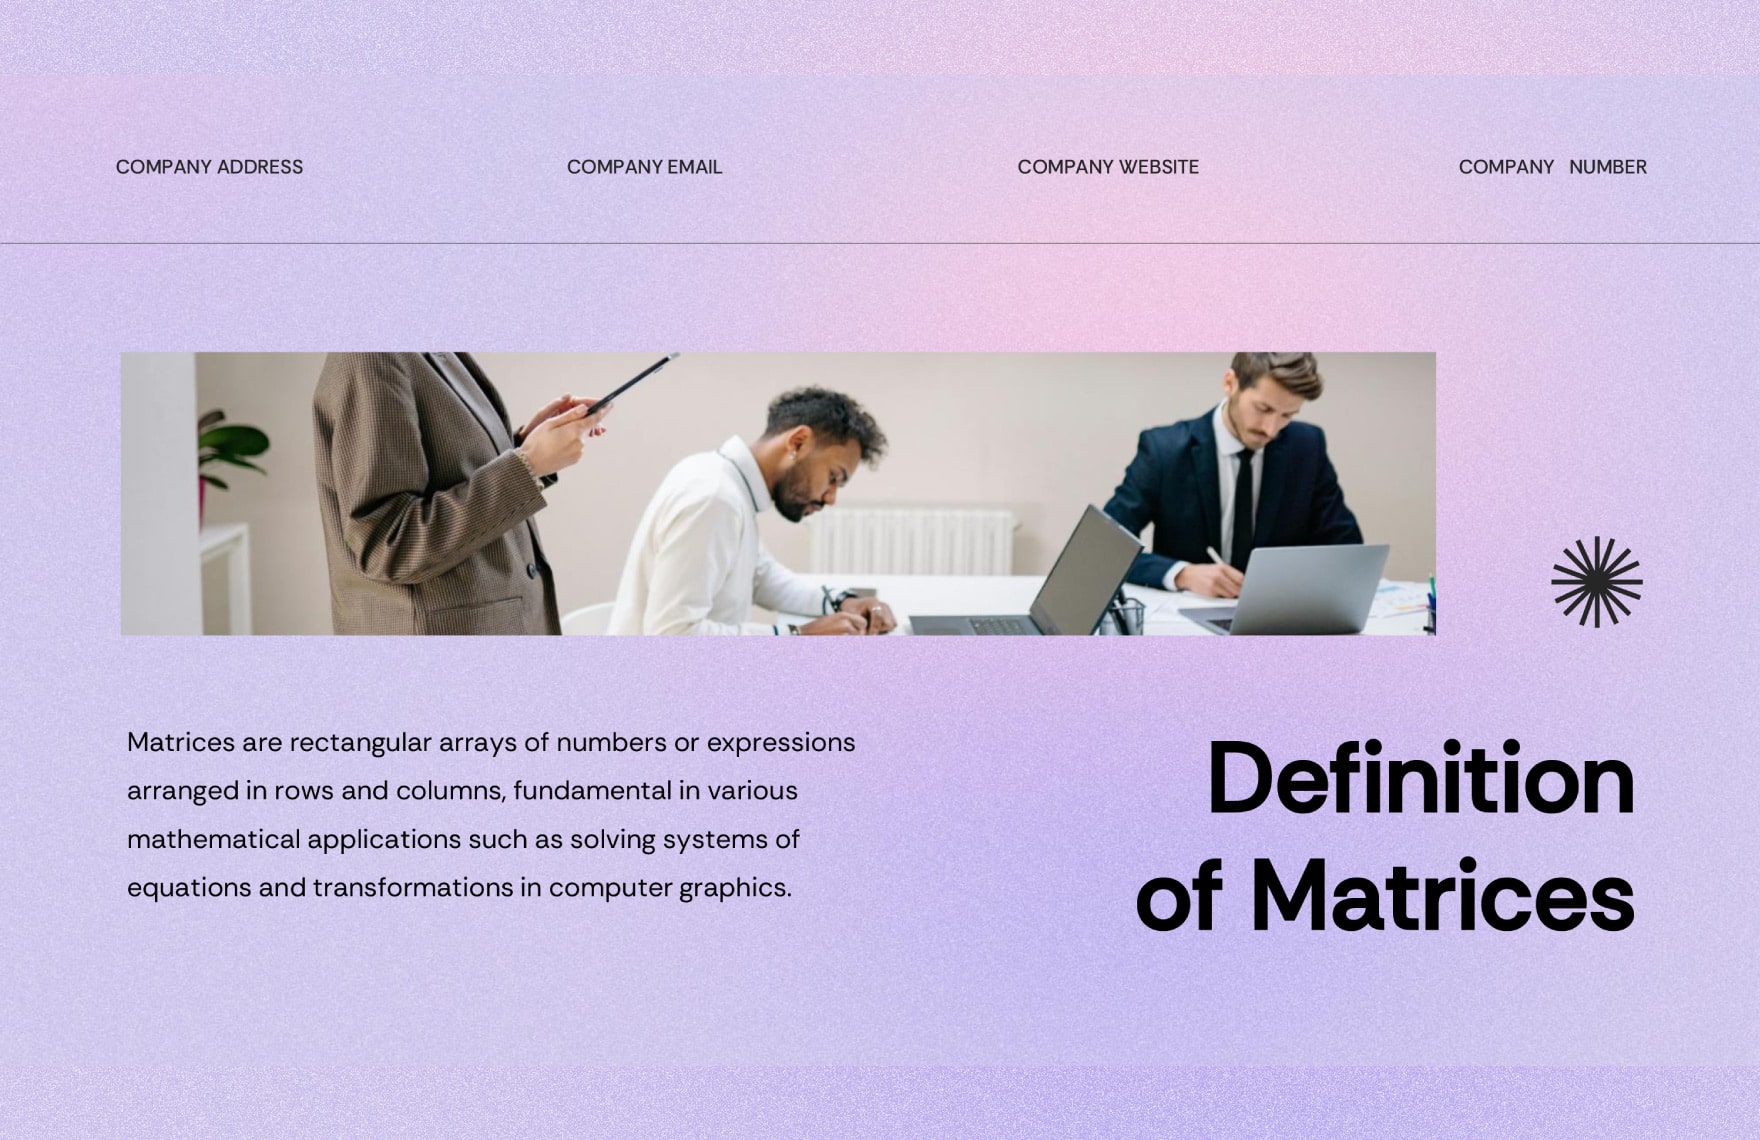 Operations on Matrices PPT Template